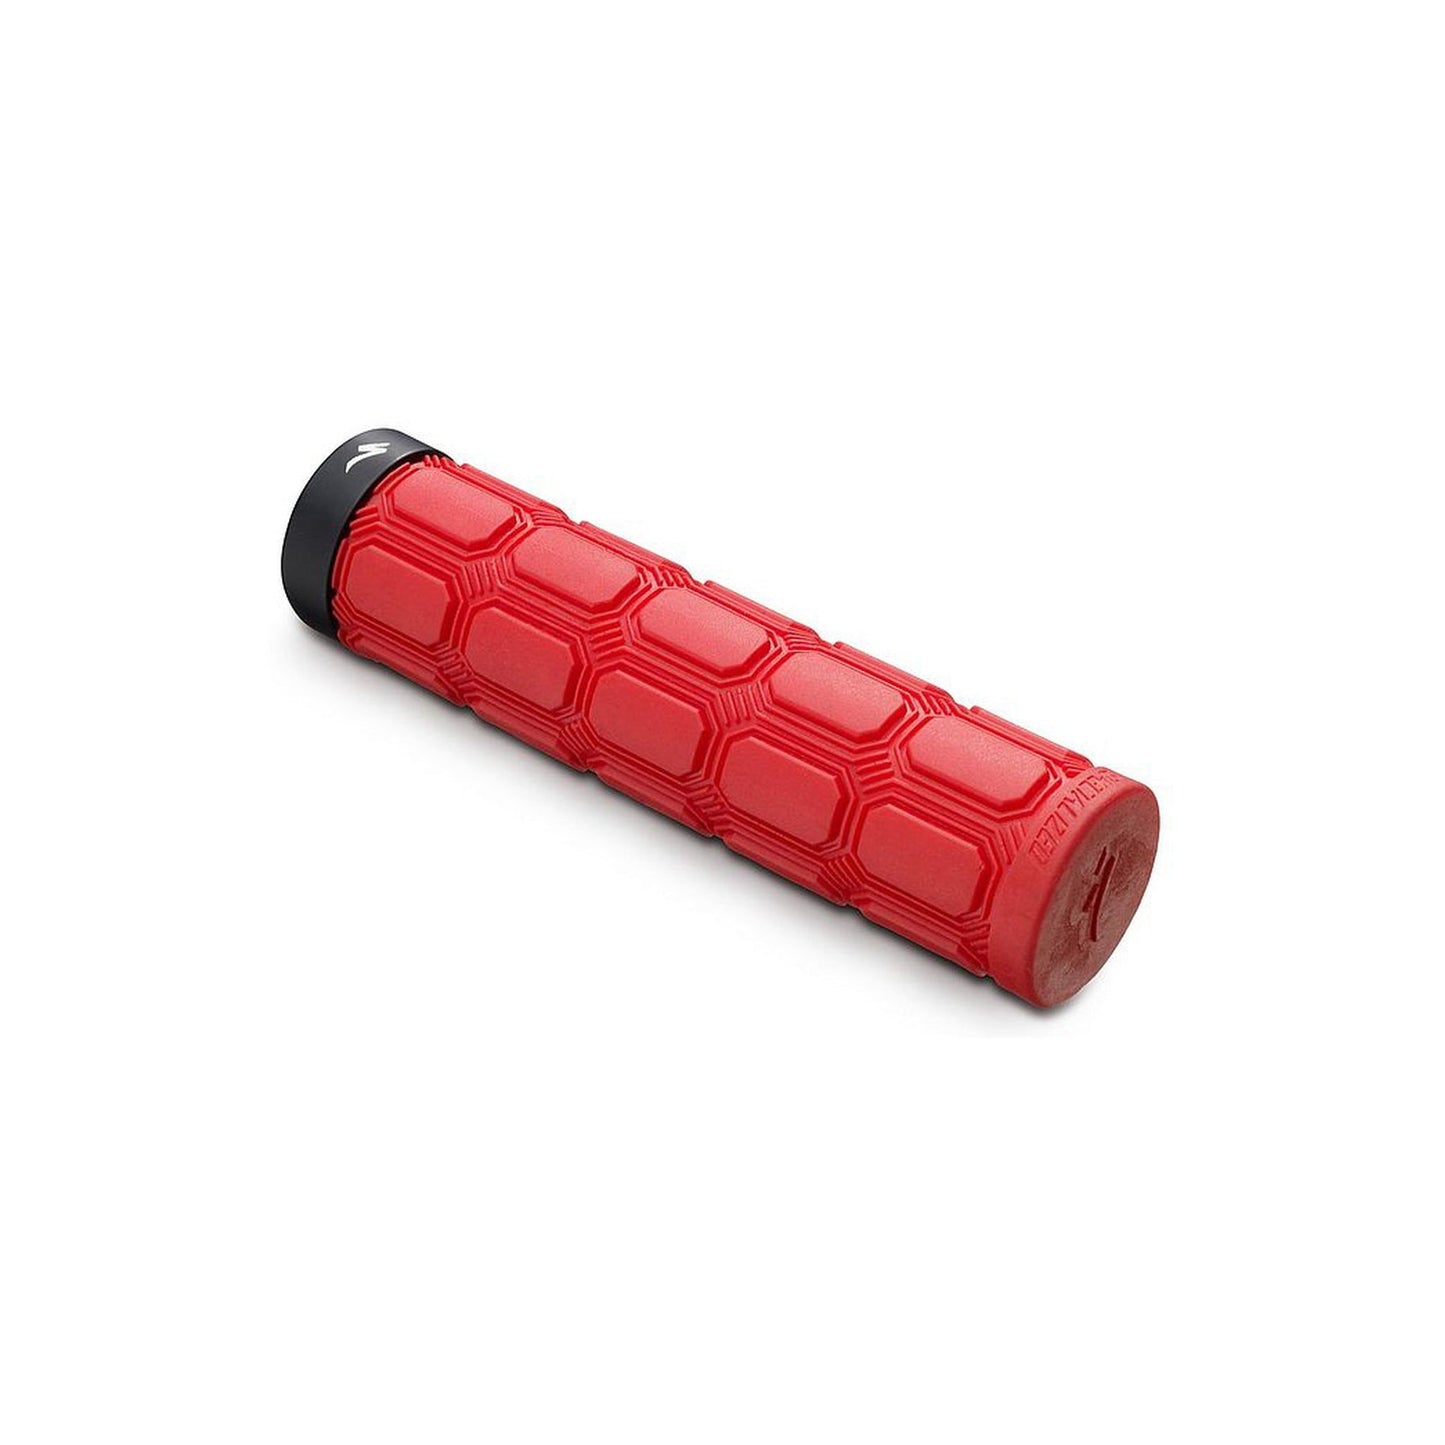 ENDURO LOCKING GRIP RED-Cycles Direct Specialized